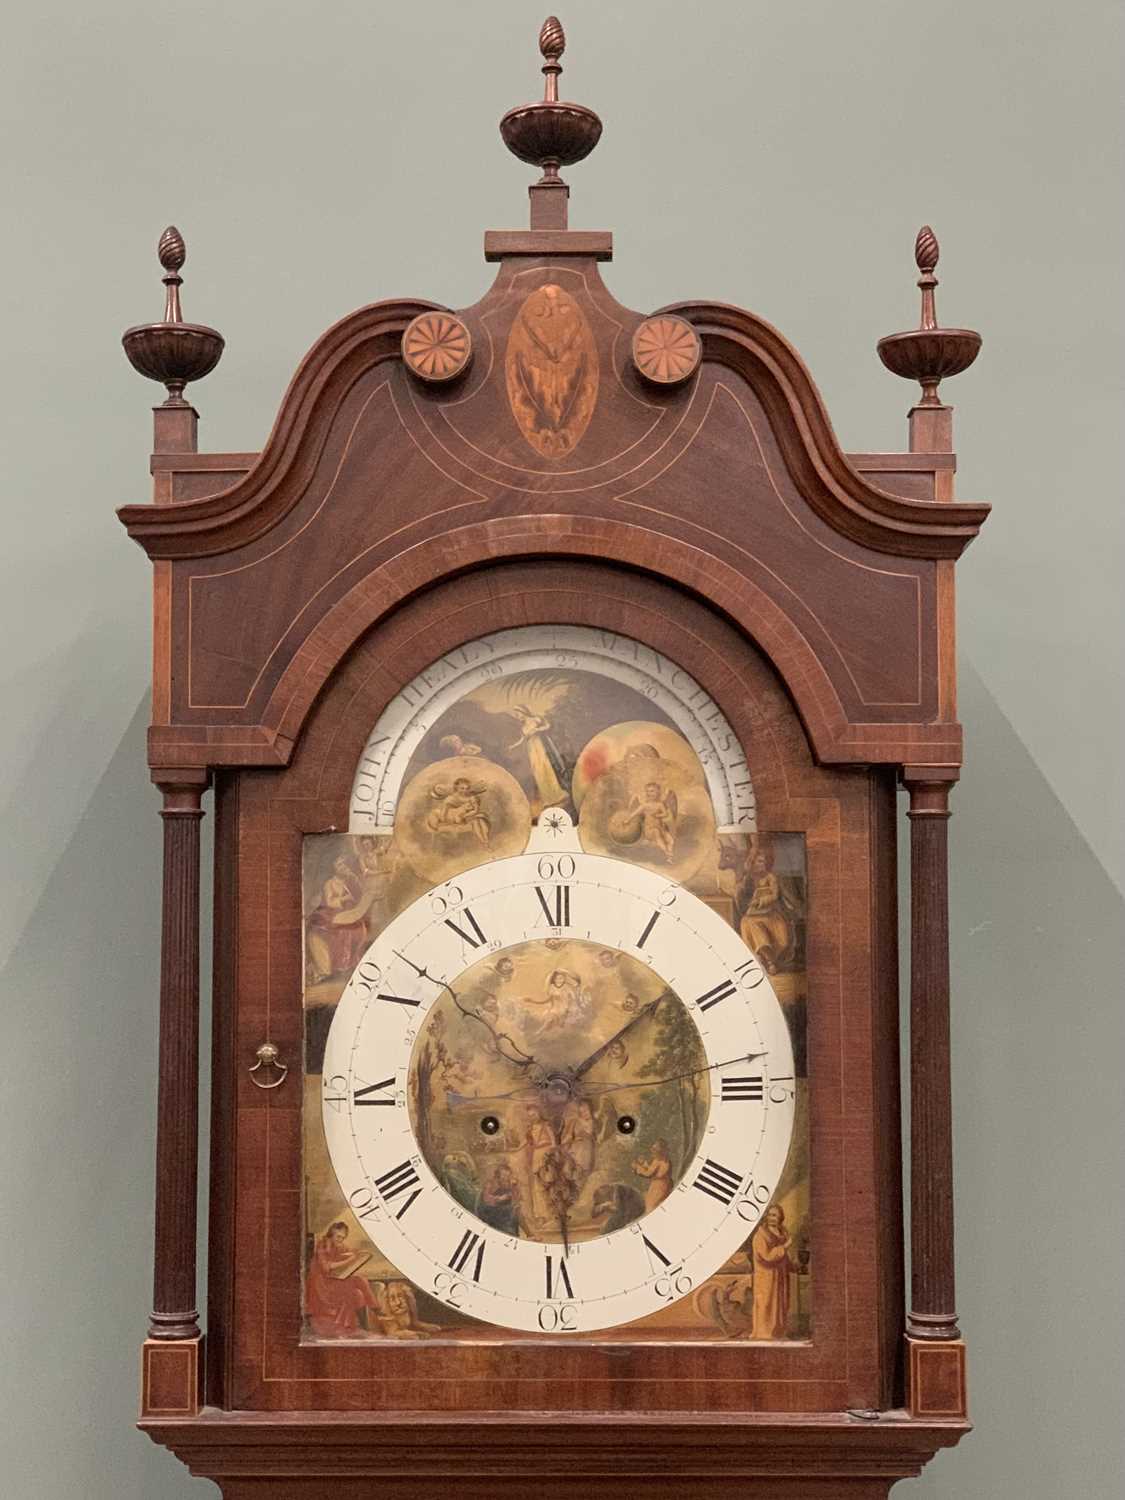 JOHN HEALY OF MANCHESTER VICTORIAN LONGCASE CLOCK inlaid mahogany, colourful arched top moon-phase